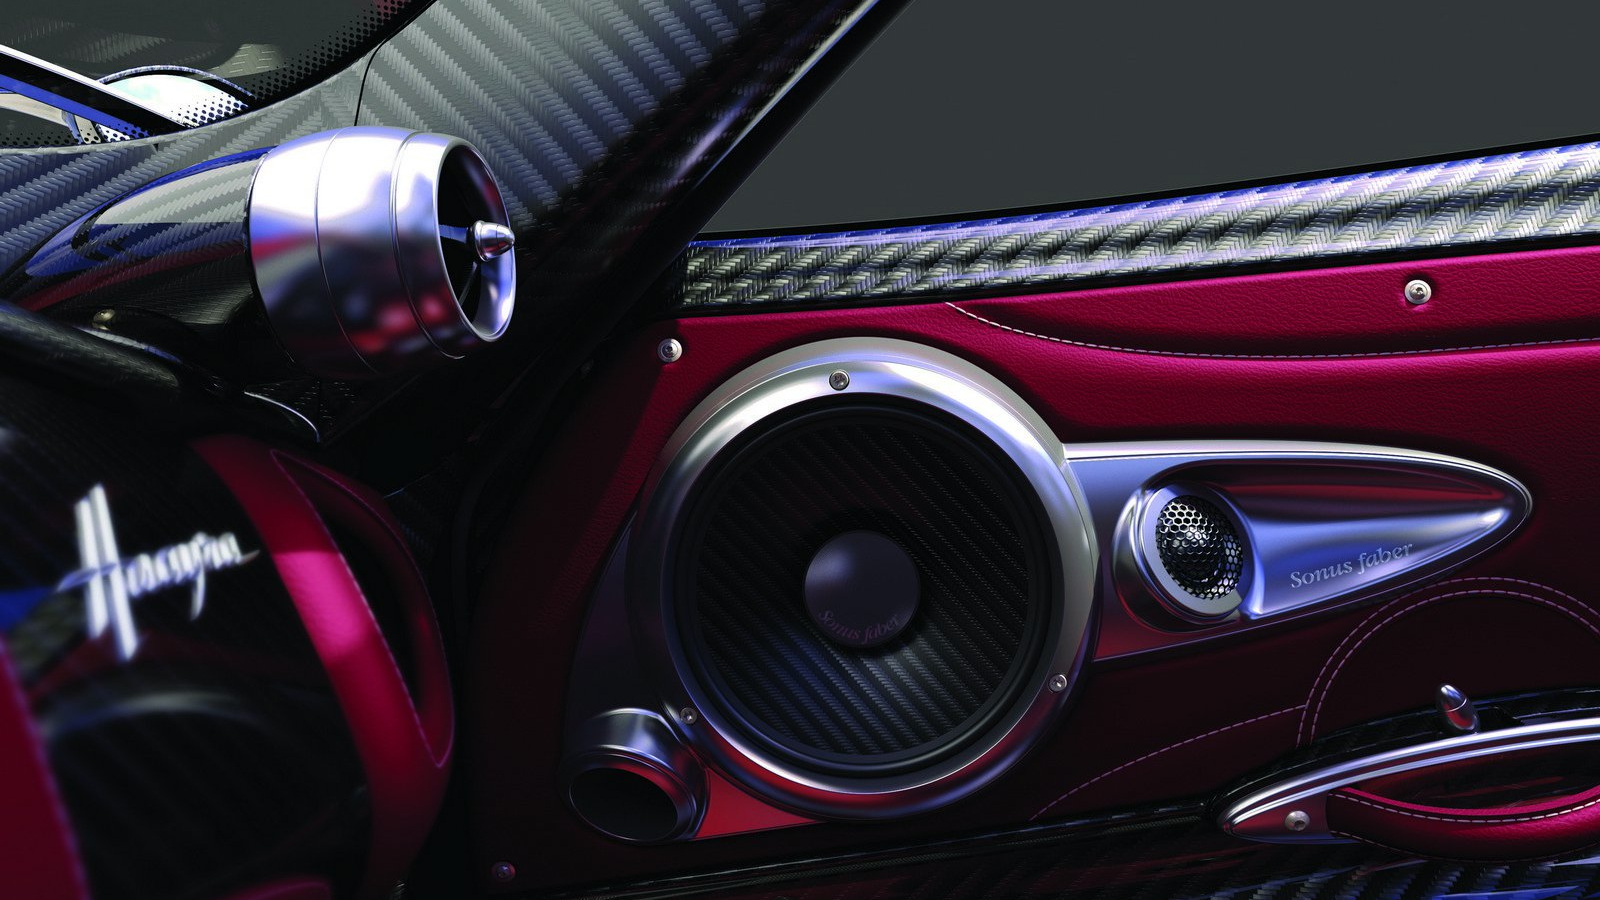 The Sonus faber audio system in the Pagani Huayra